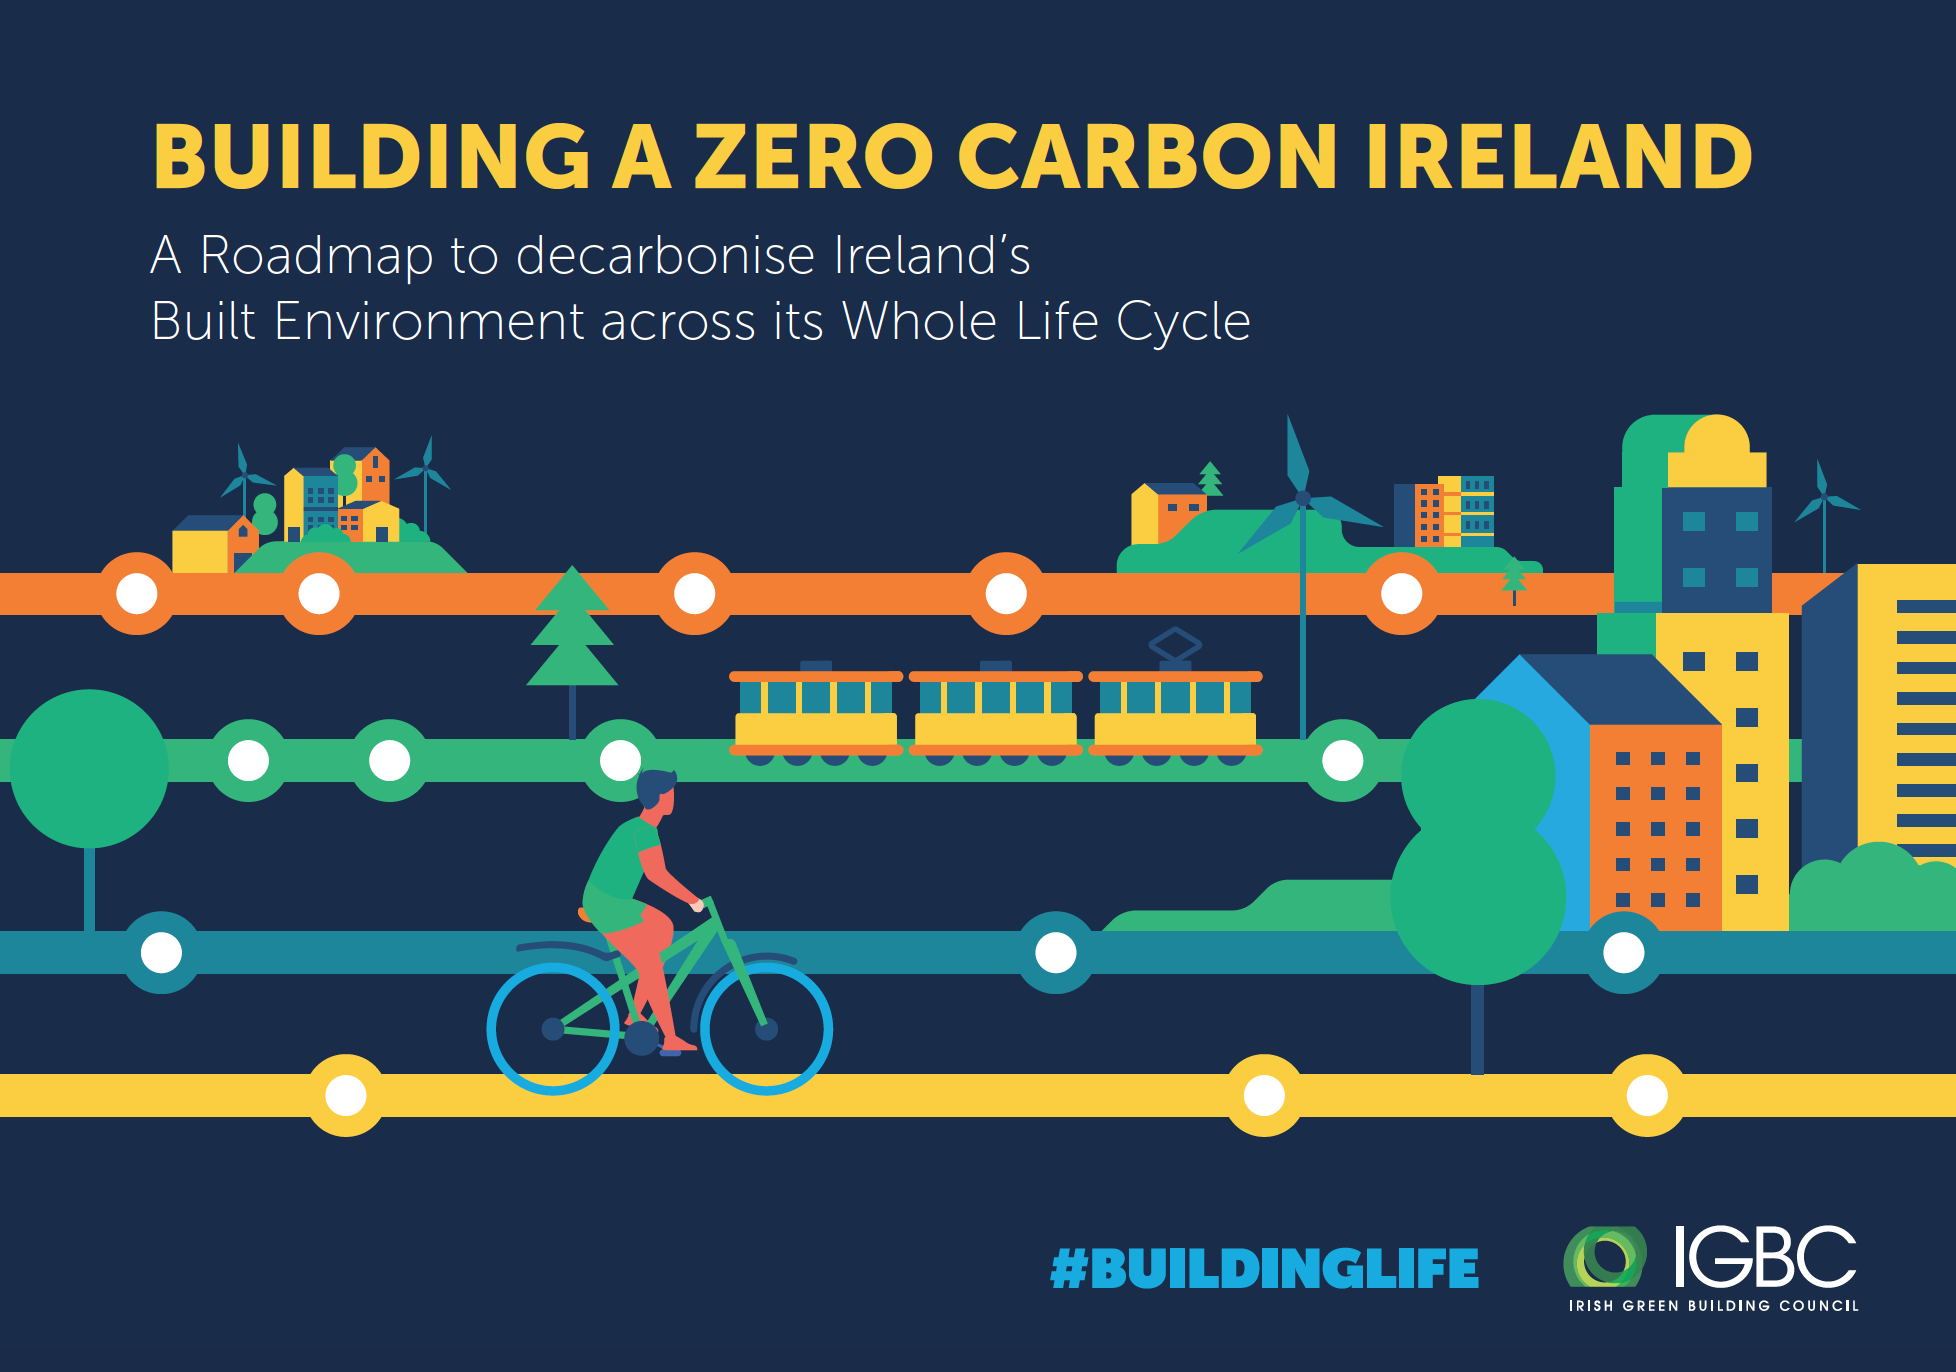 #BuildingLife – Moving construction to a zero-carbon footing